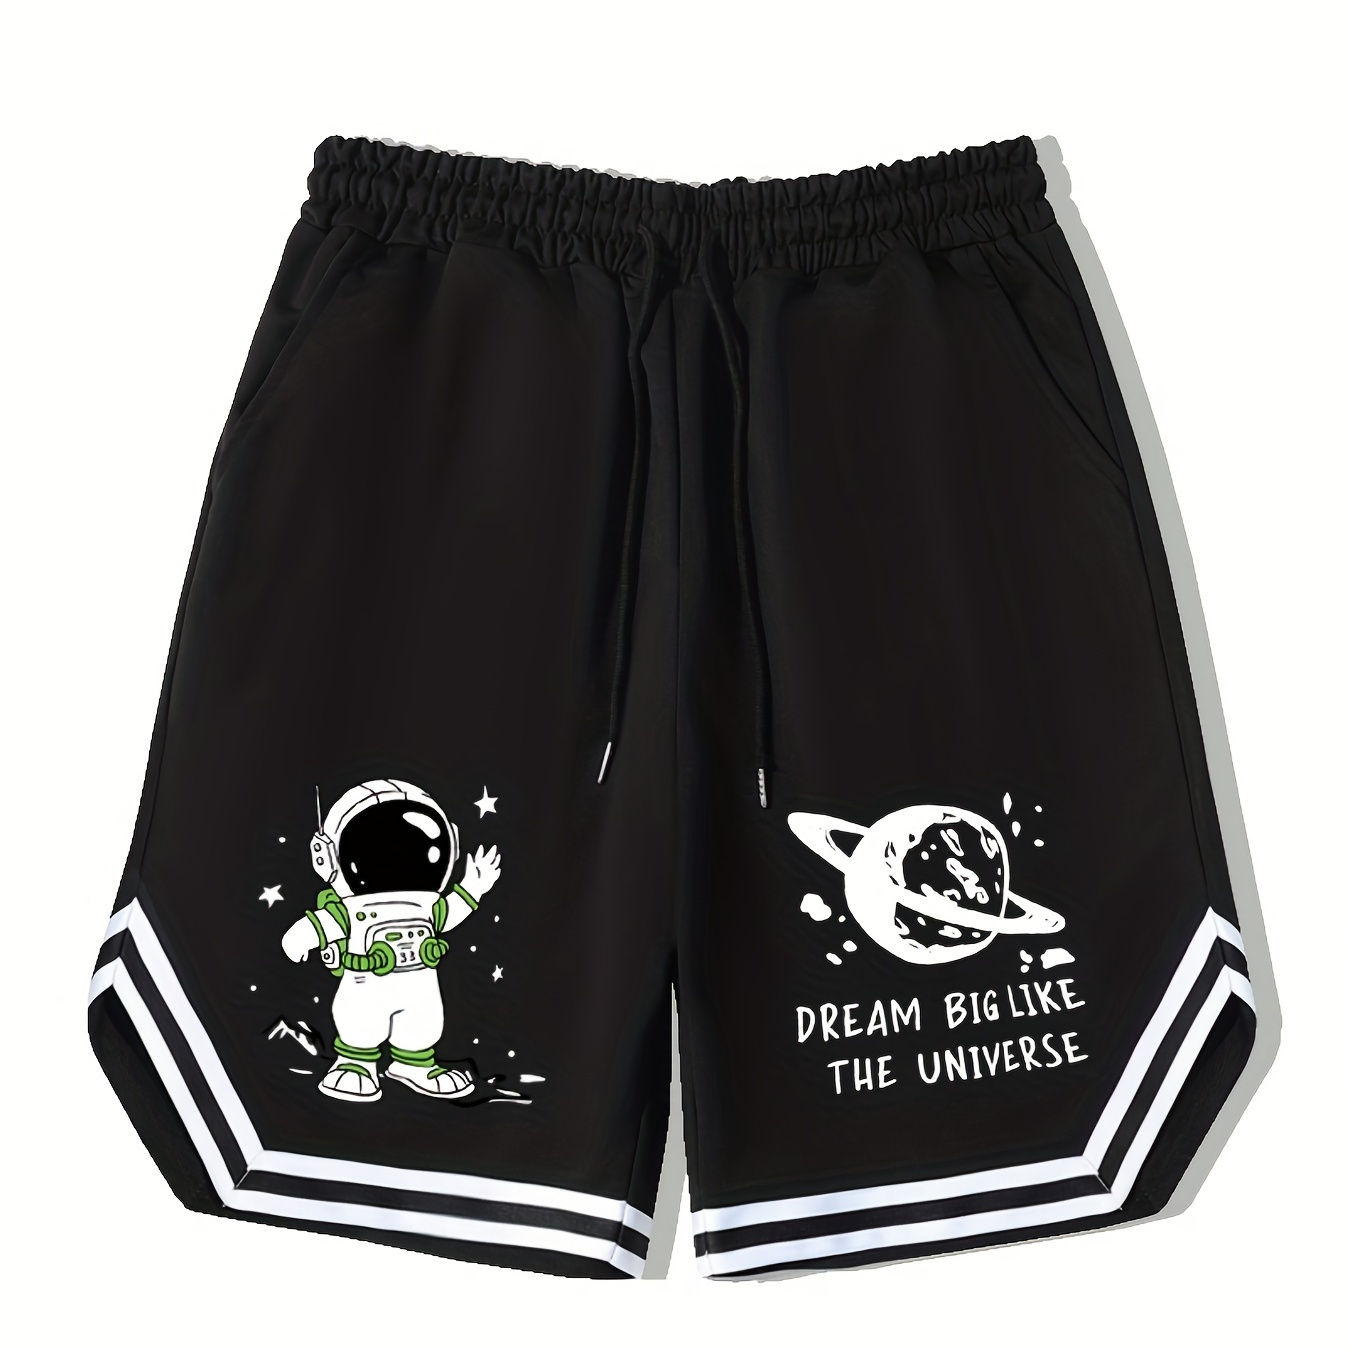 

dream Big Like The Universe", Men's Astronaut Graphic Basketball Shorts, Casual Slightly Stretch Breathable Drawstring Shorts, Men's Clothing For Summer Outdoor